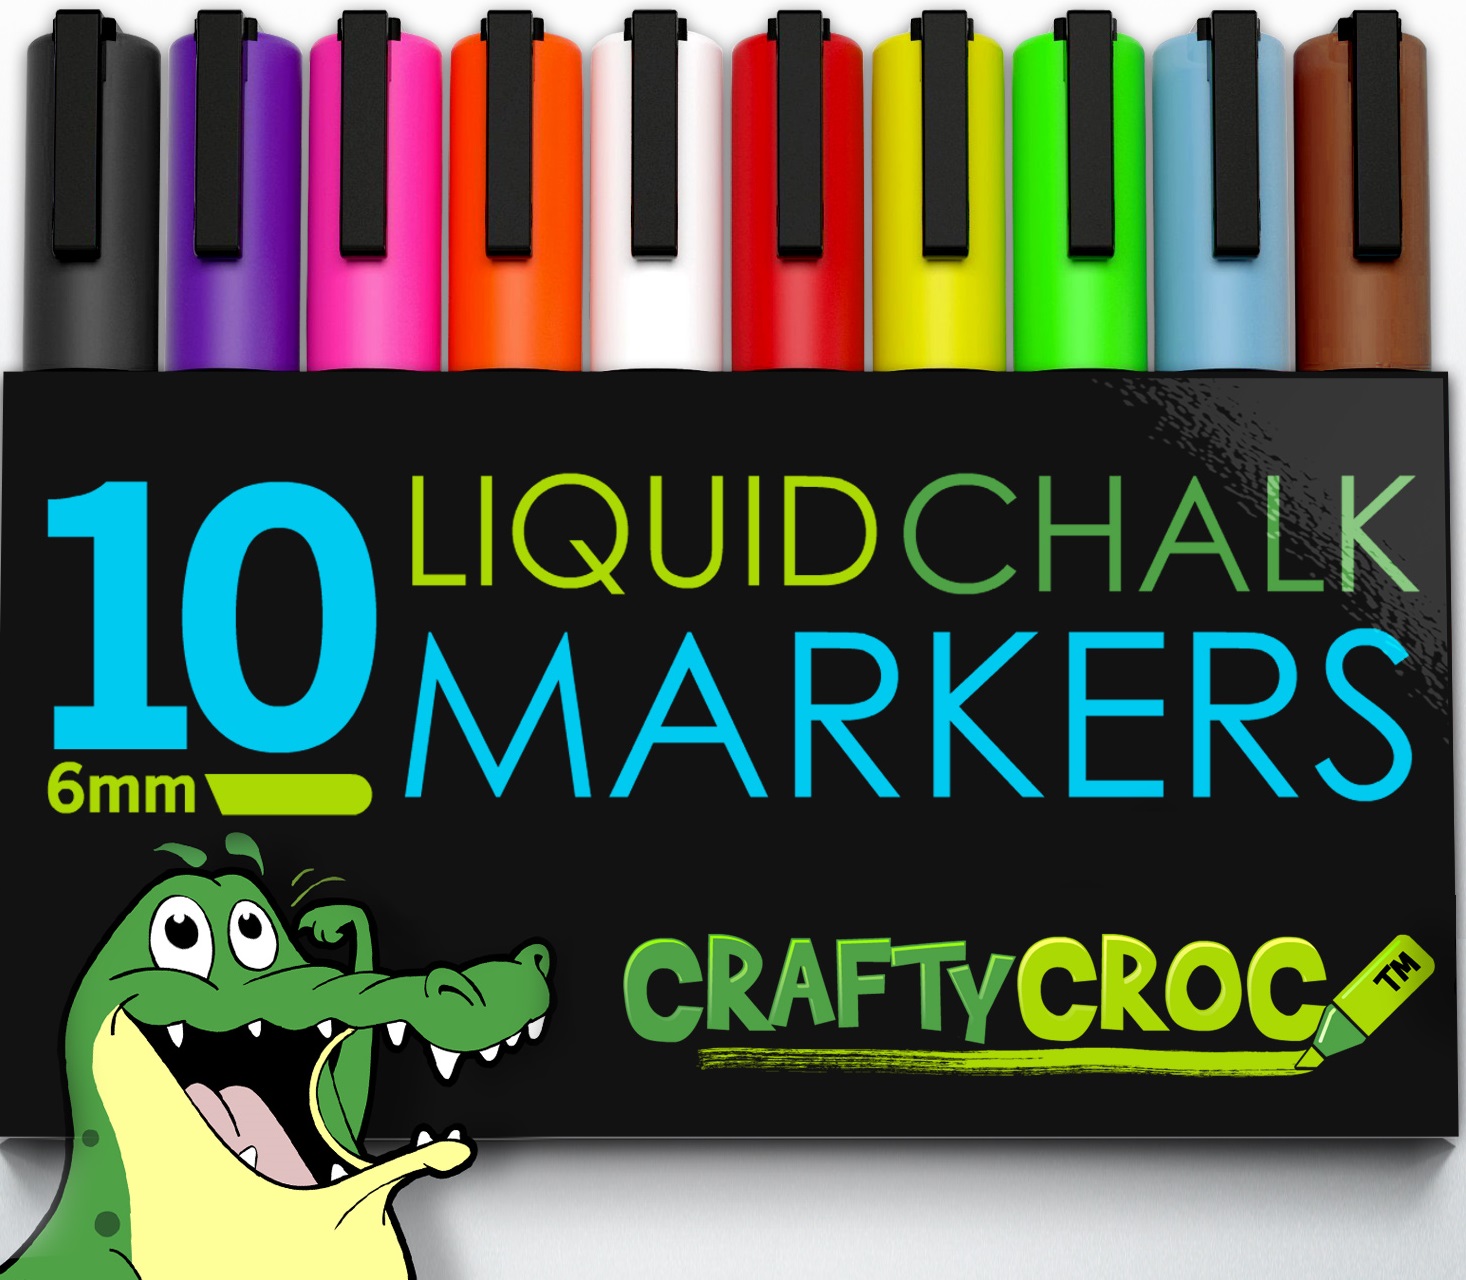 #CraftyCroc Liquid Chalk Markers – Perfect Gift for Craft Lovers!